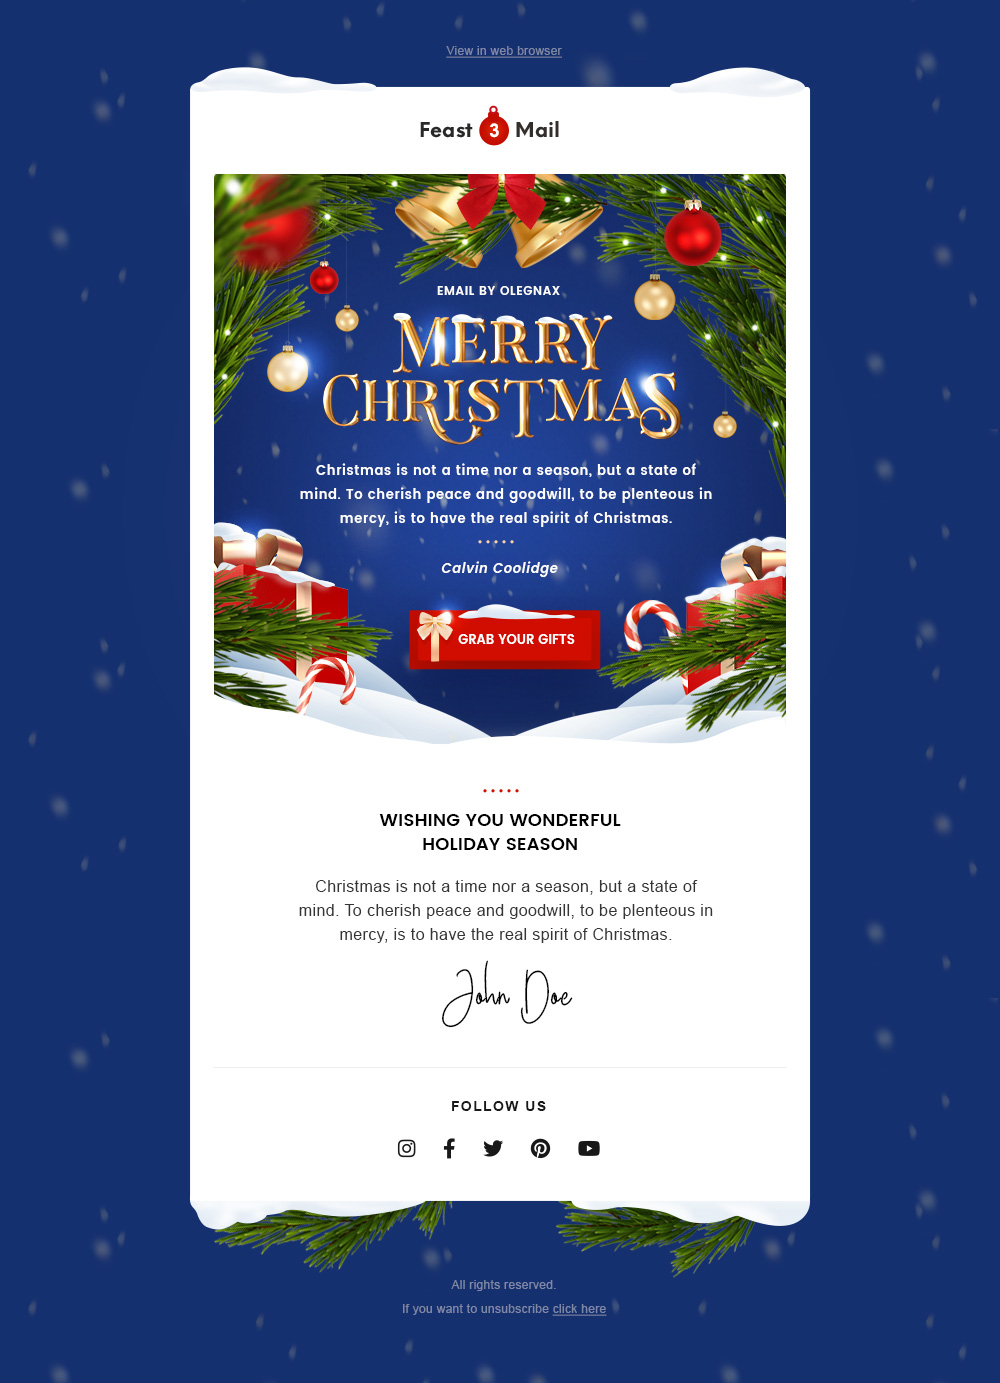 feastmail-3-responsive-christmas-email-template-free-download-download-feastmail-3